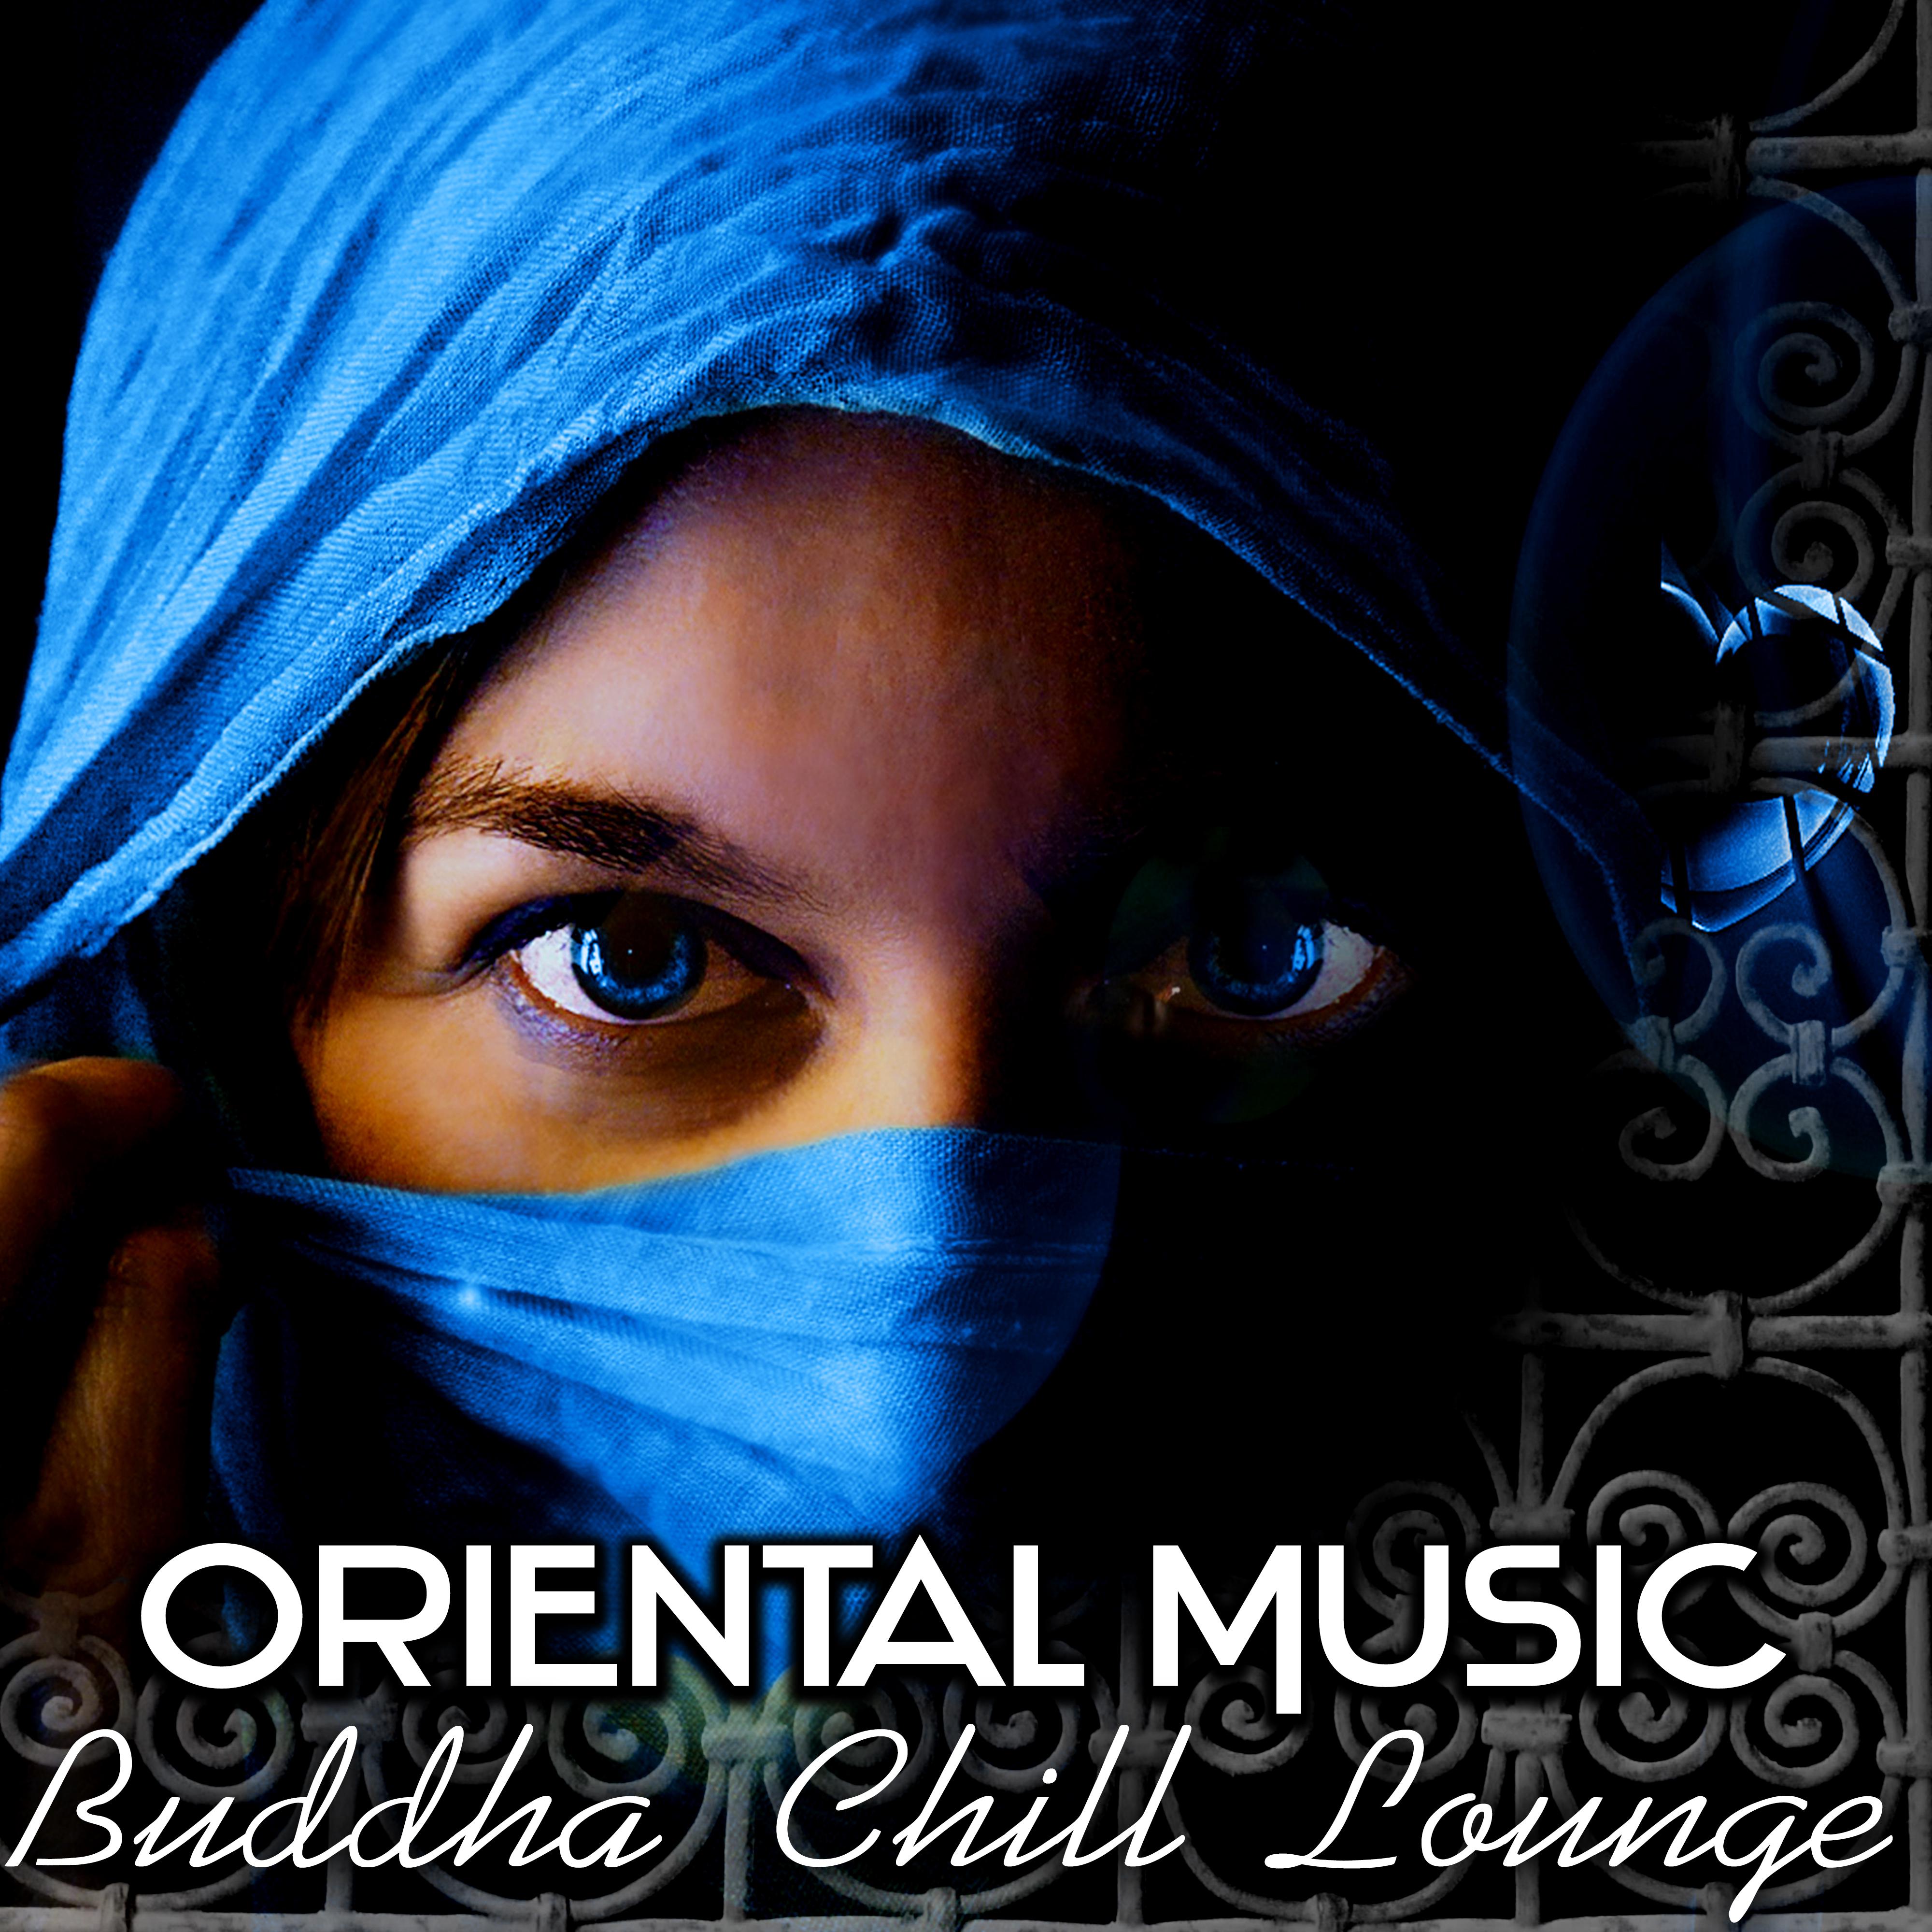 Just Oriental Chill Out